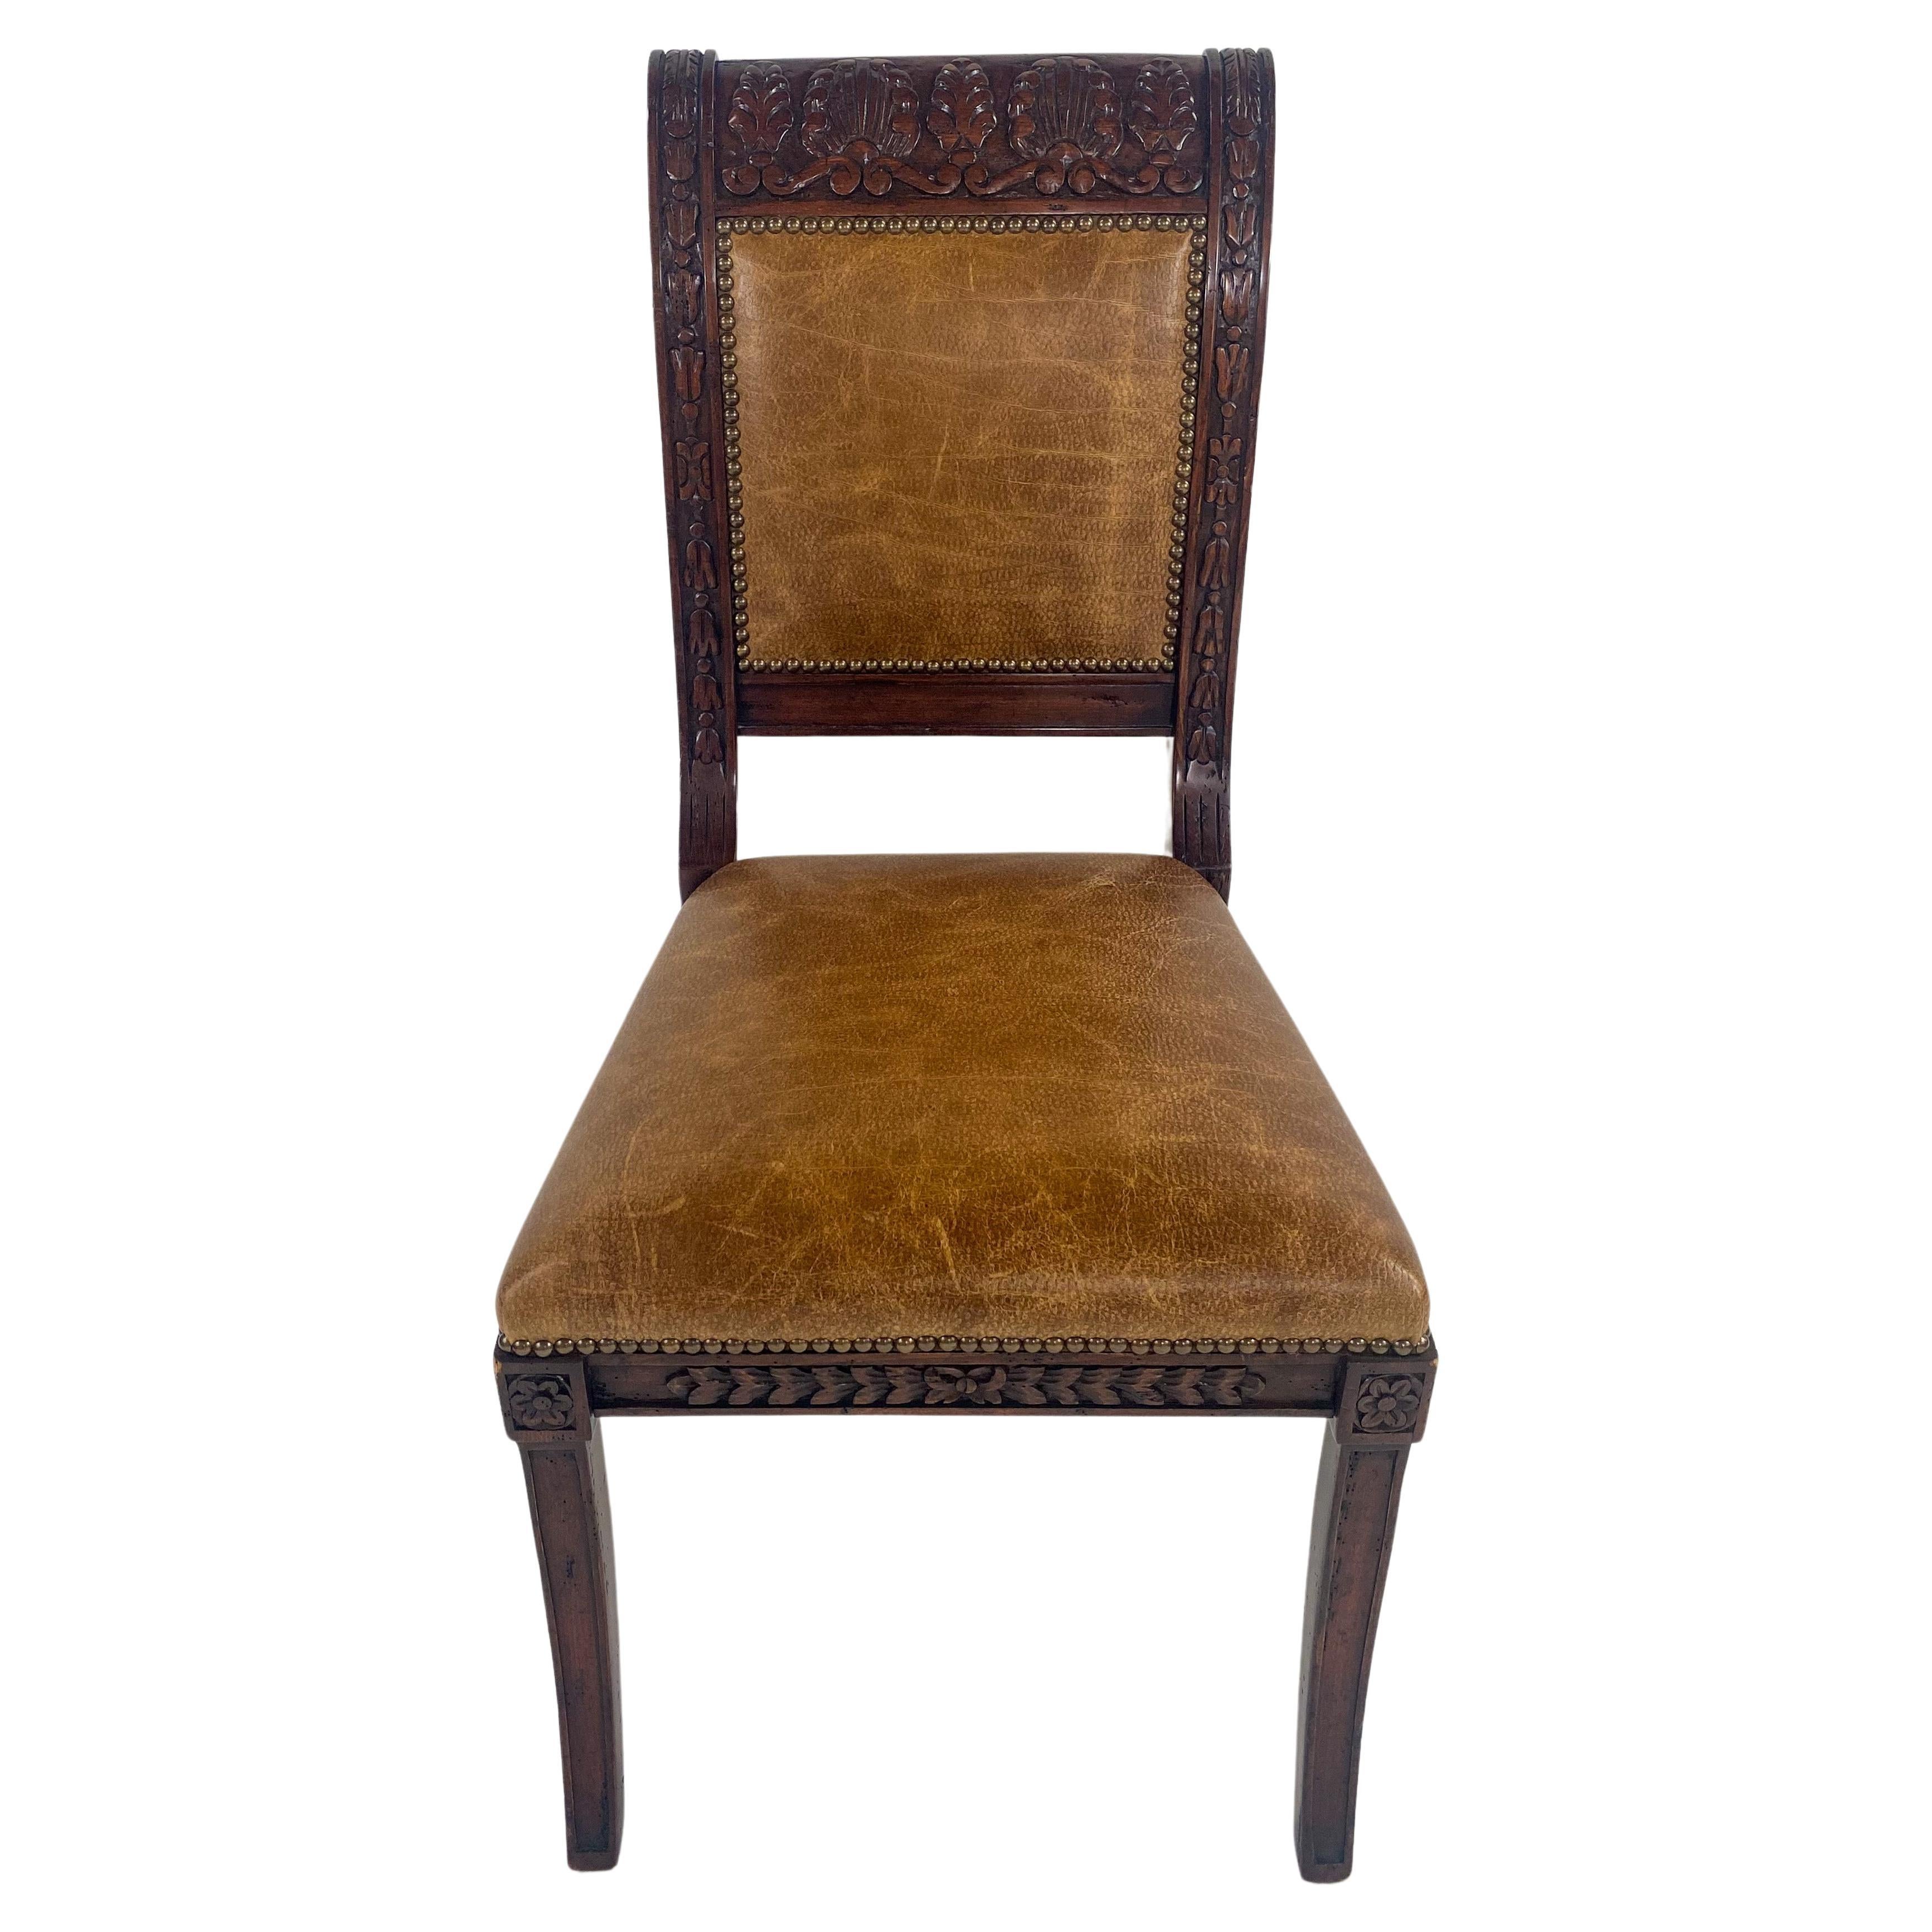 A stunning French Empire Style set of 8 dinning chairs. The chairs are made of quality Mahogany wood. The frame is exquisitely hand carved and shows amazing floral and acanthus patterns. The back and the seat are upholstered in genuine leather in